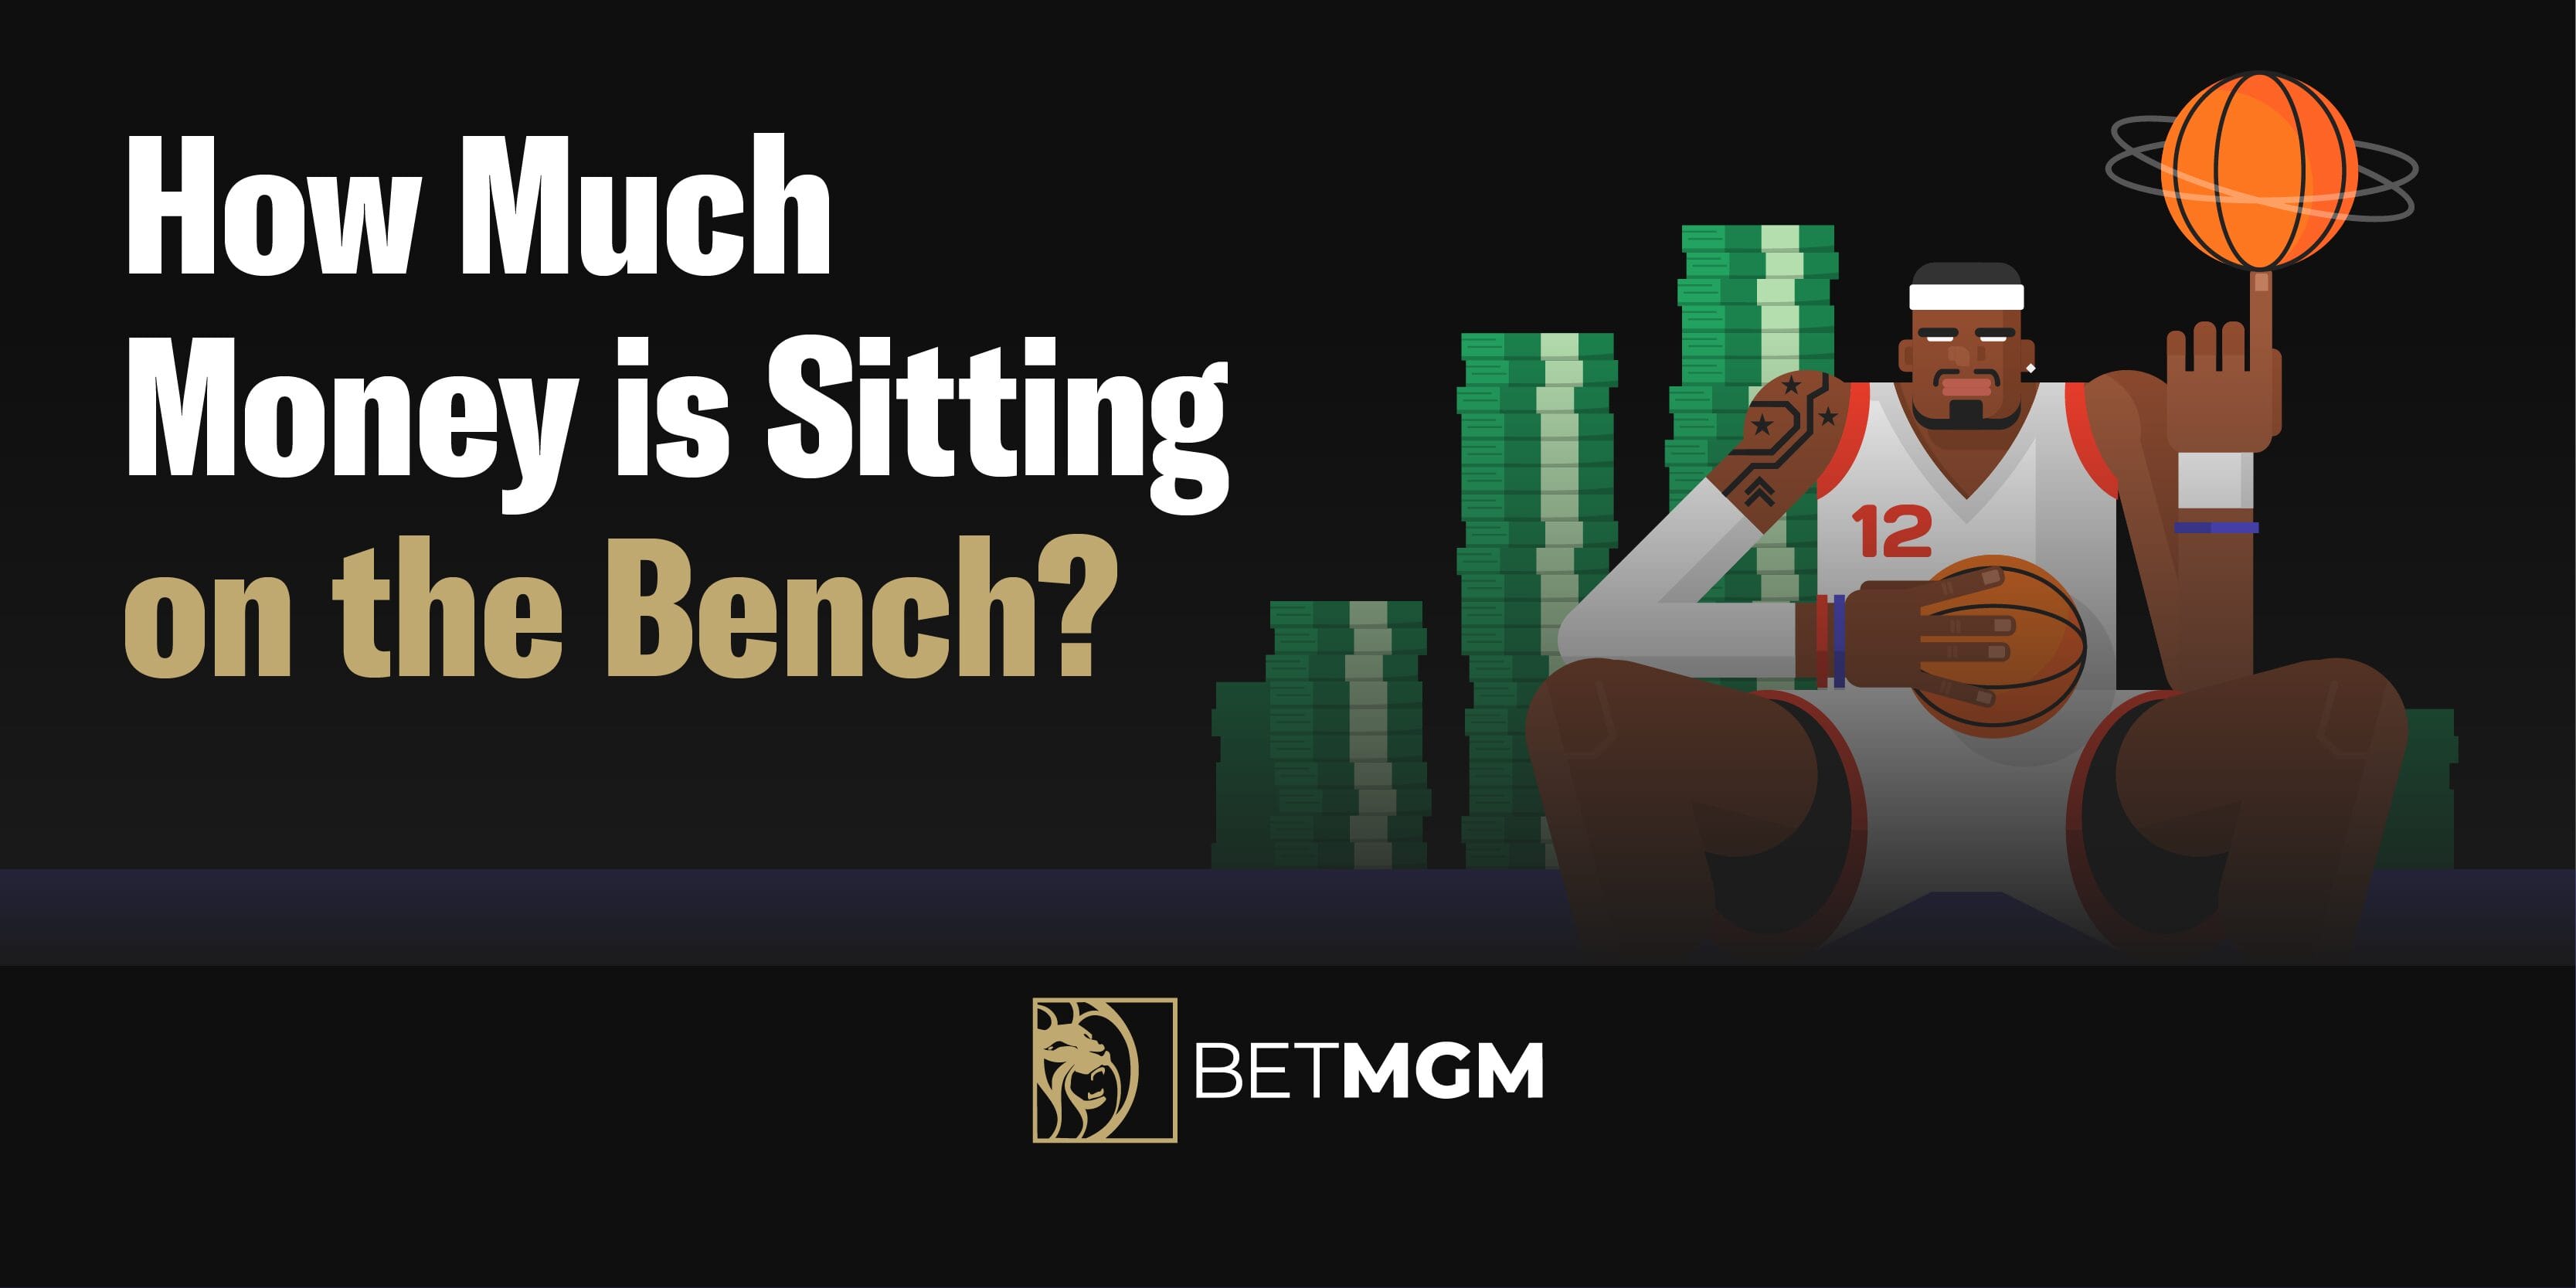 title-image-for-the-article-how-much-money-is-sitting-on-the-bench